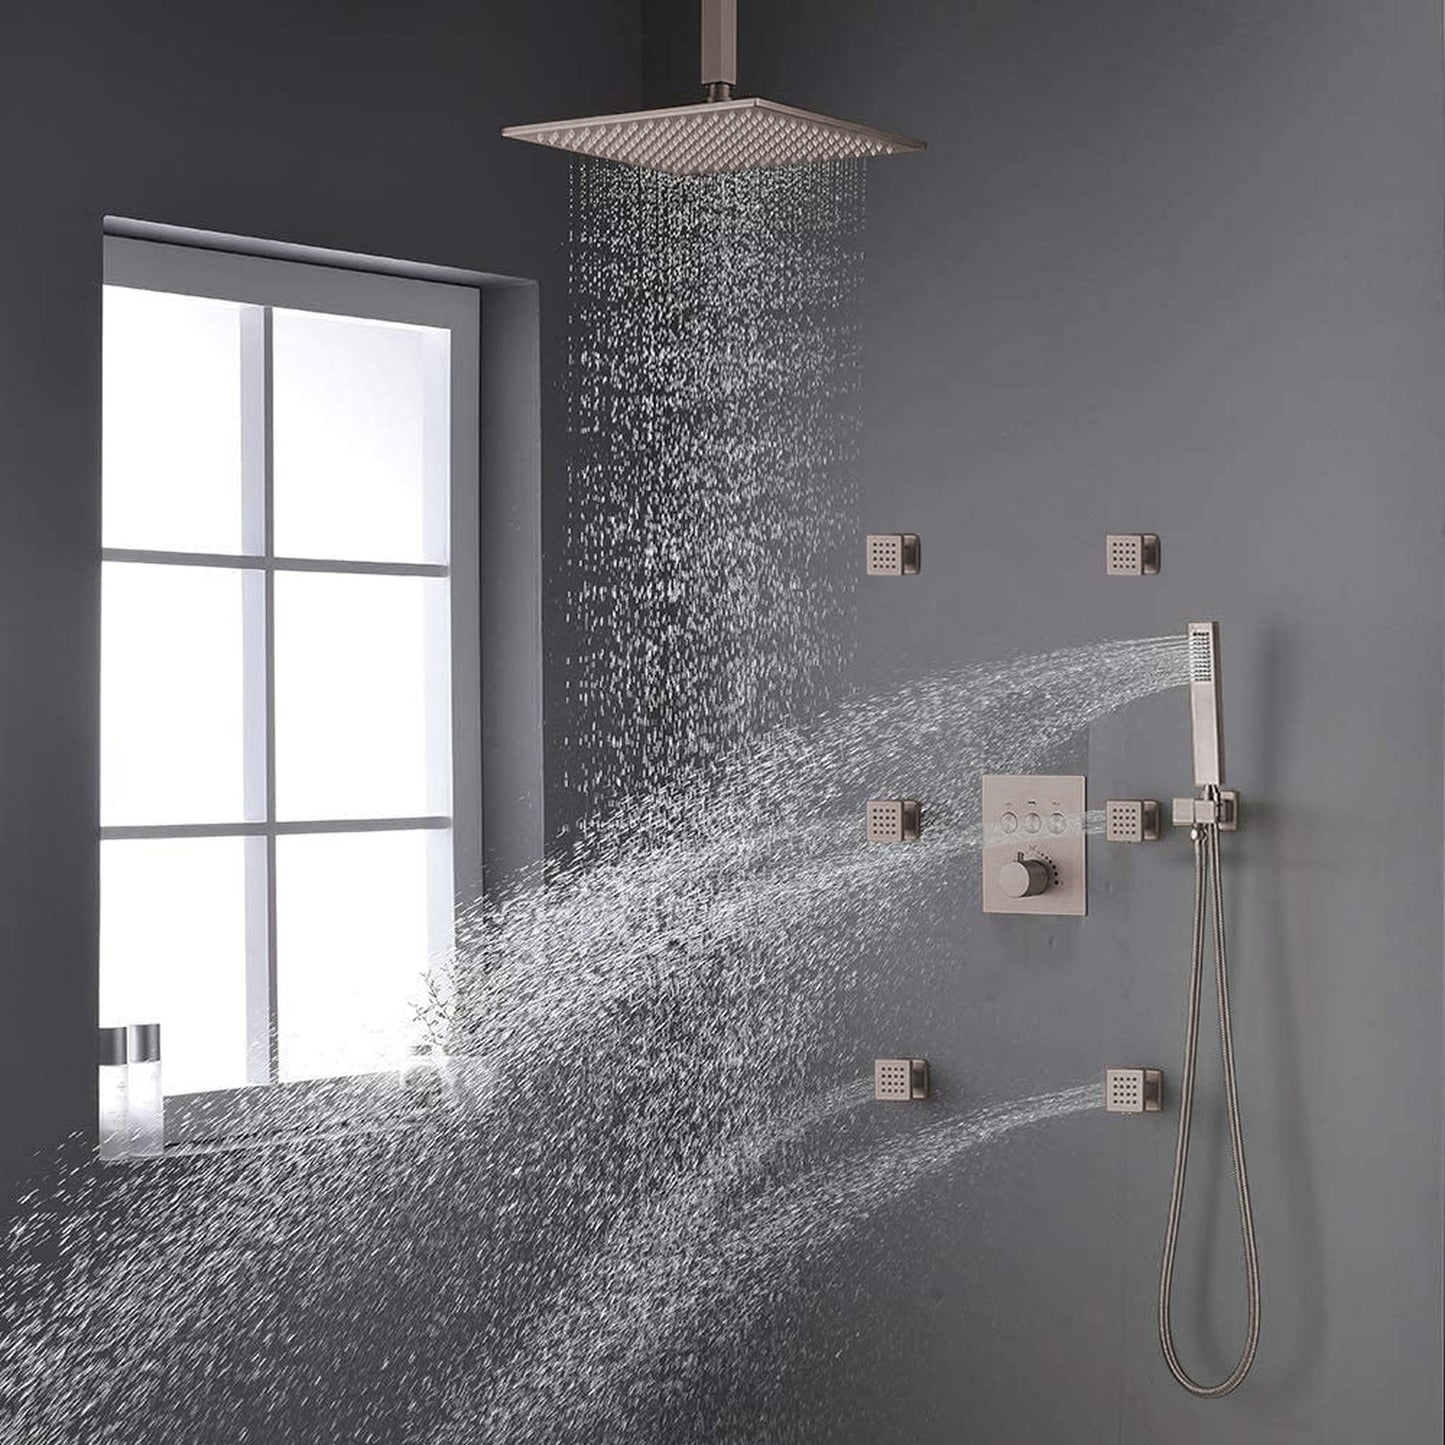 Fontana 8" Brushed Nickel Square Ceiling Mounted Rainfall Thermostat Mixer Shower System With 4-Jet Sprays and Hand Shower